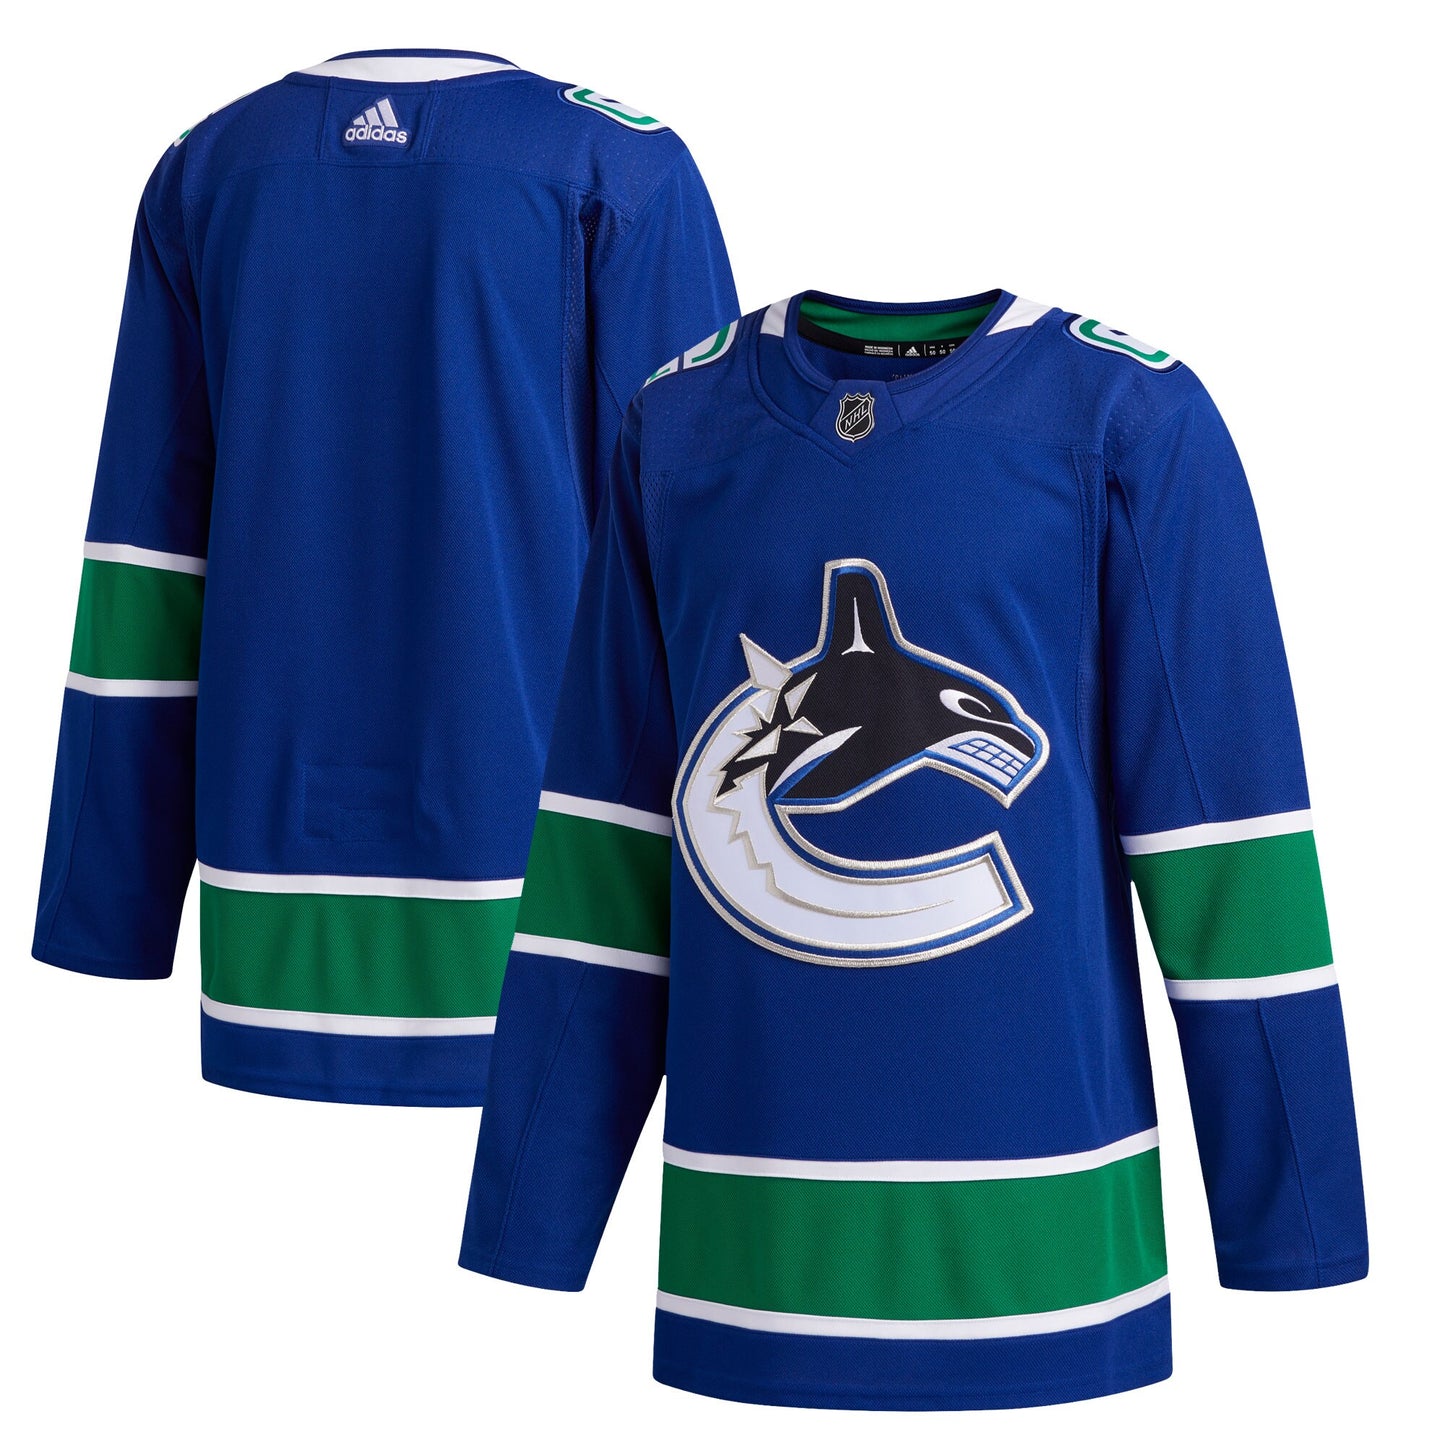 Vancouver Canucks adidas 2019/20 Home Authentic Jersey - Blue